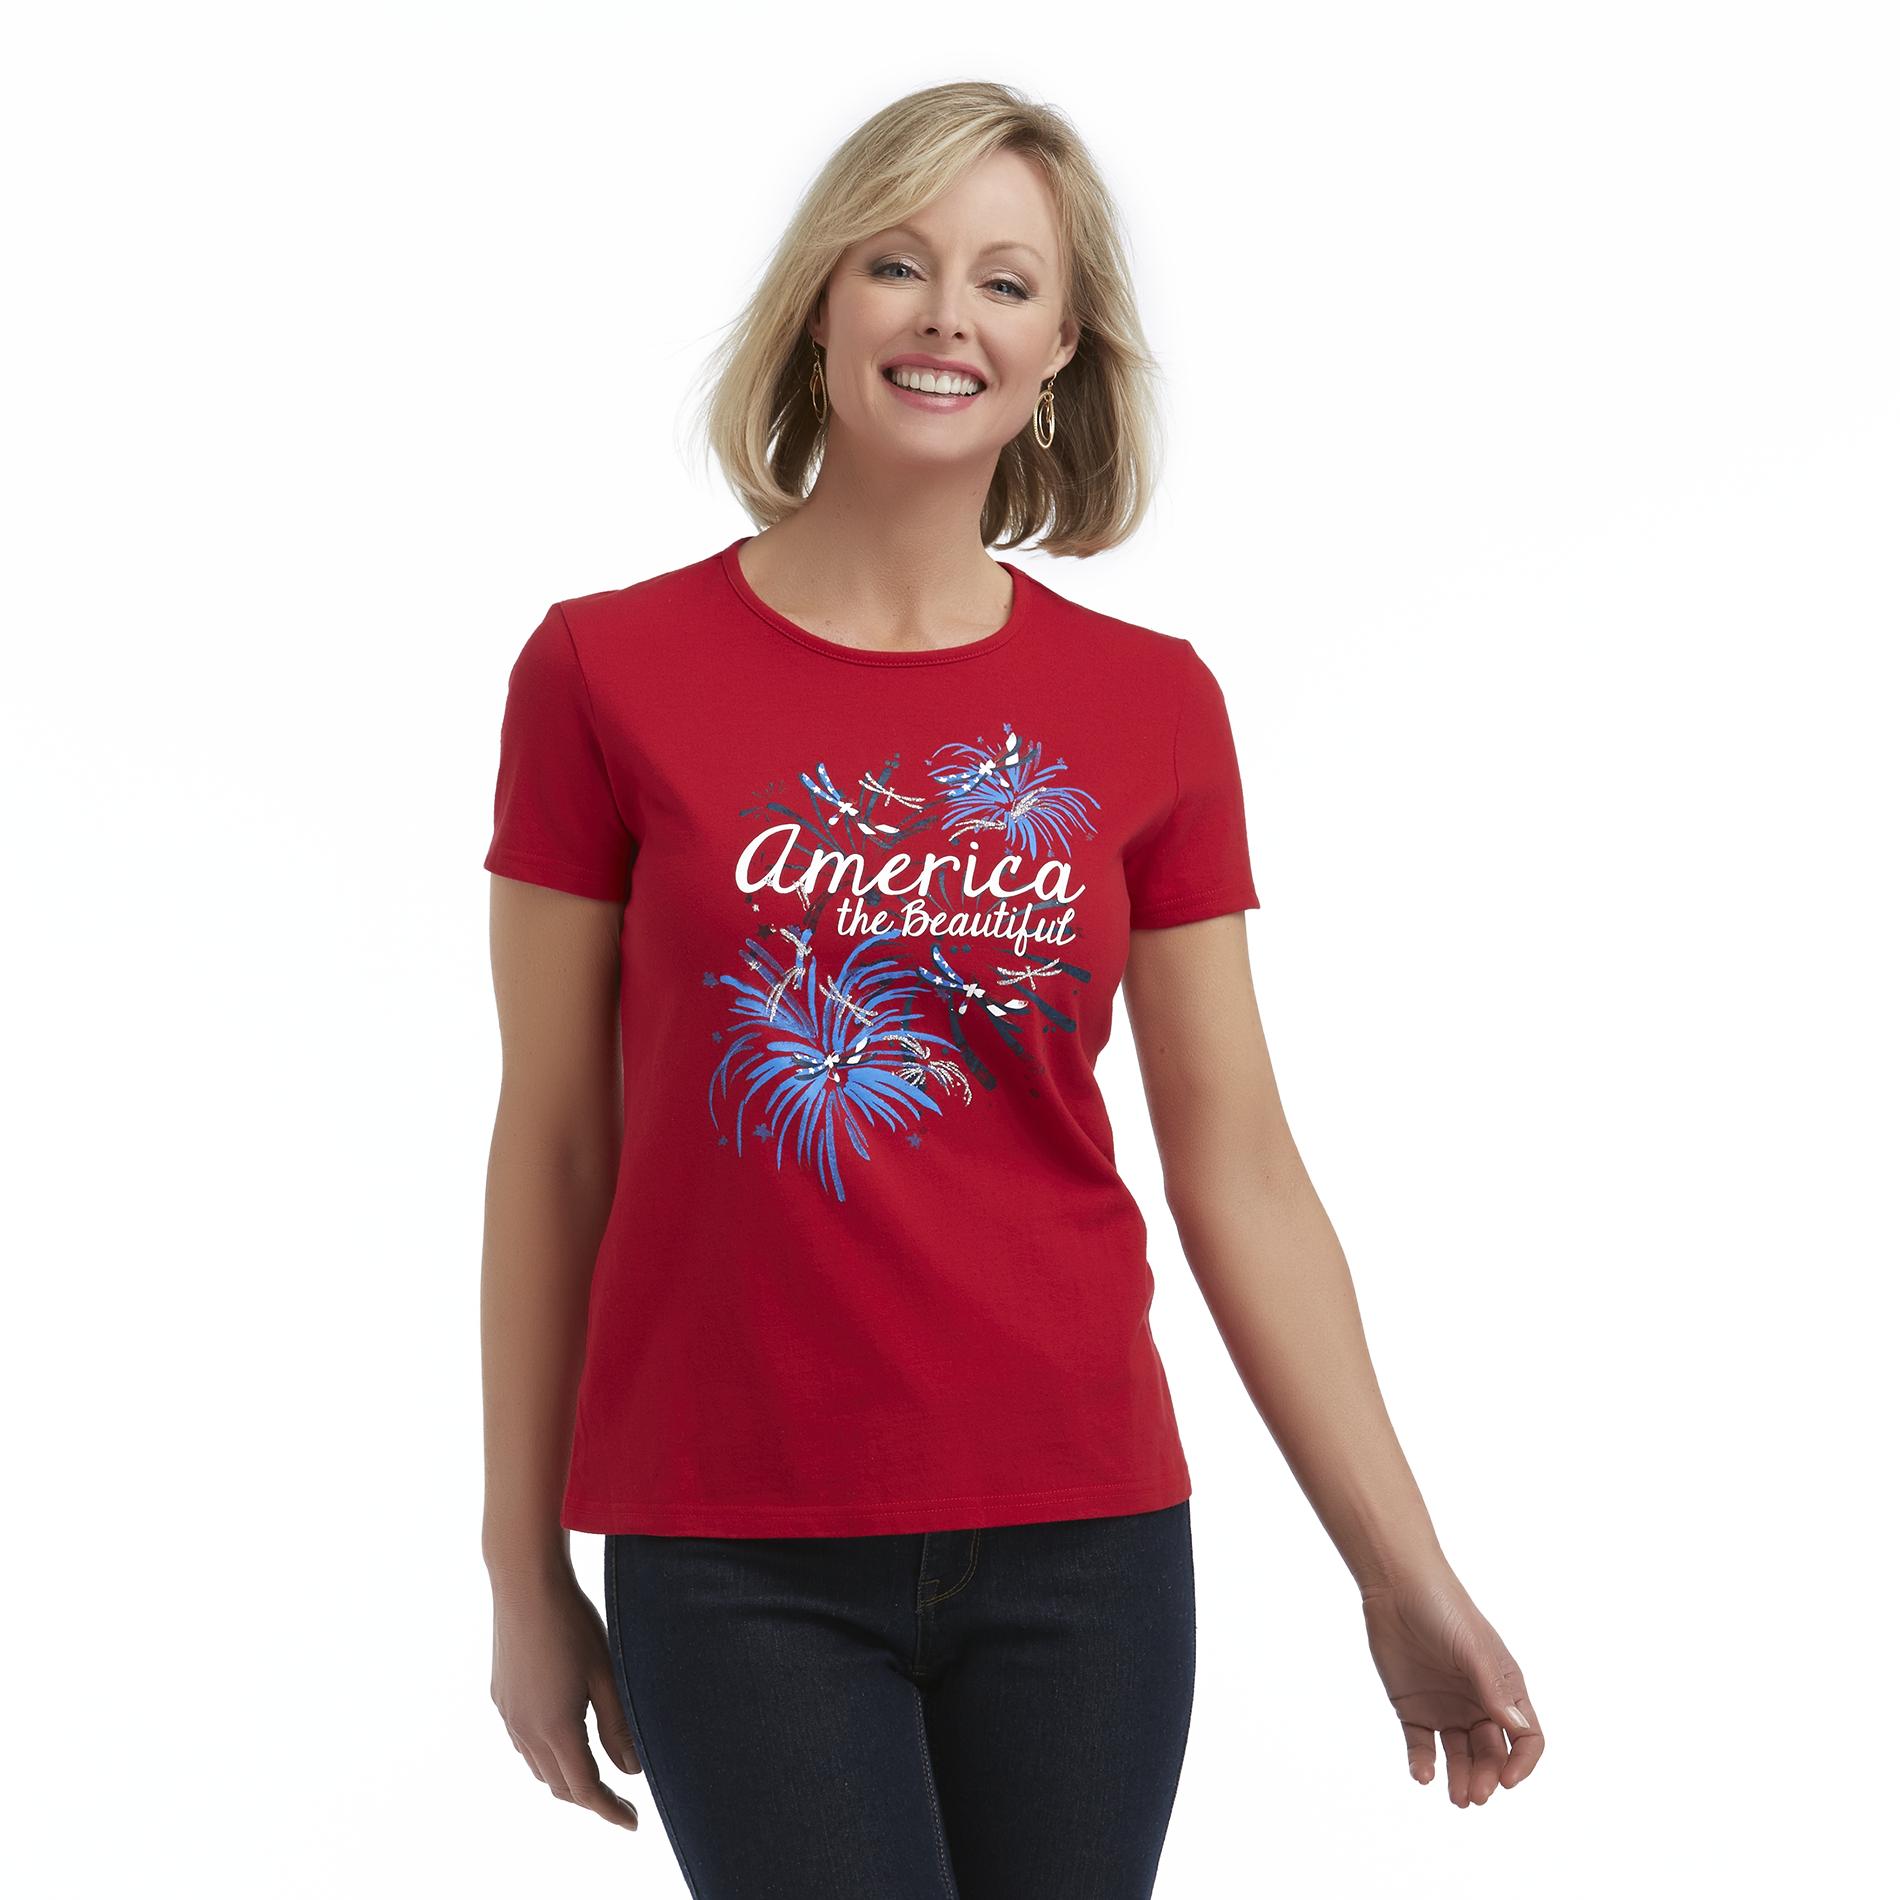 Holiday Editions Women's Graphic T-Shirt - America the Beautiful